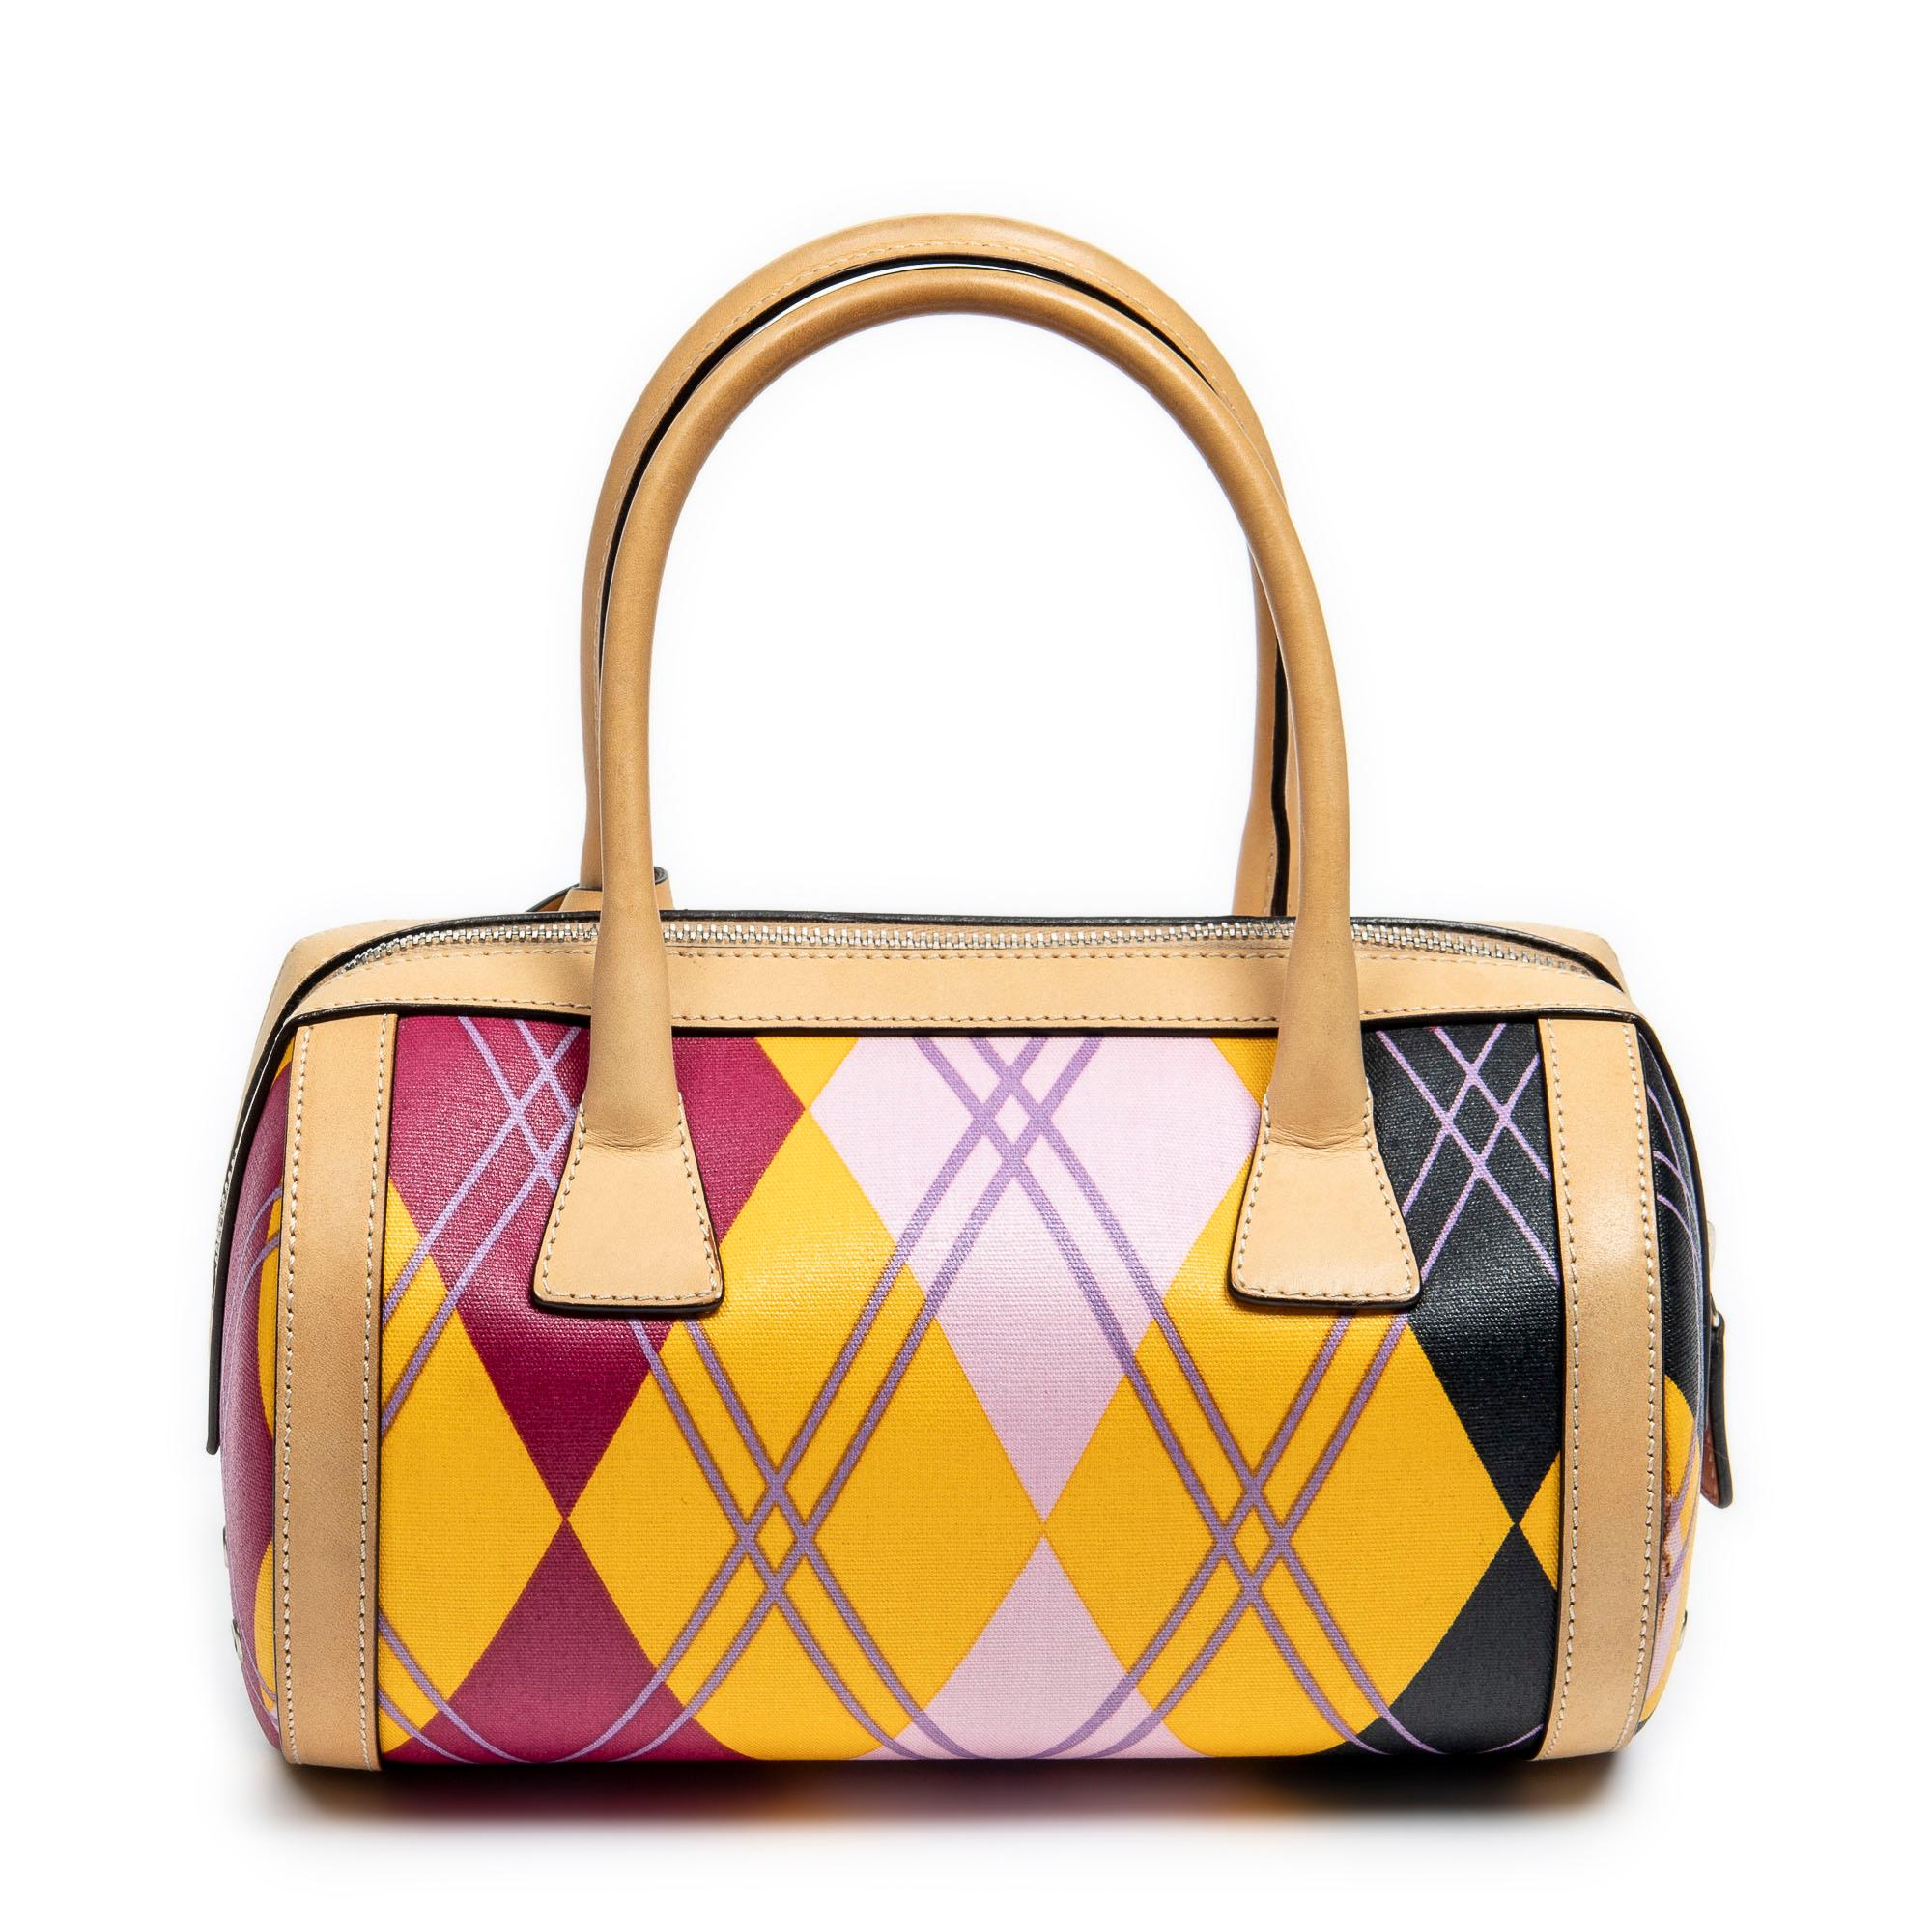 Dior by John Galliano 2004 Plaid Check Bowling Bag In Excellent Condition For Sale In Atlanta, GA